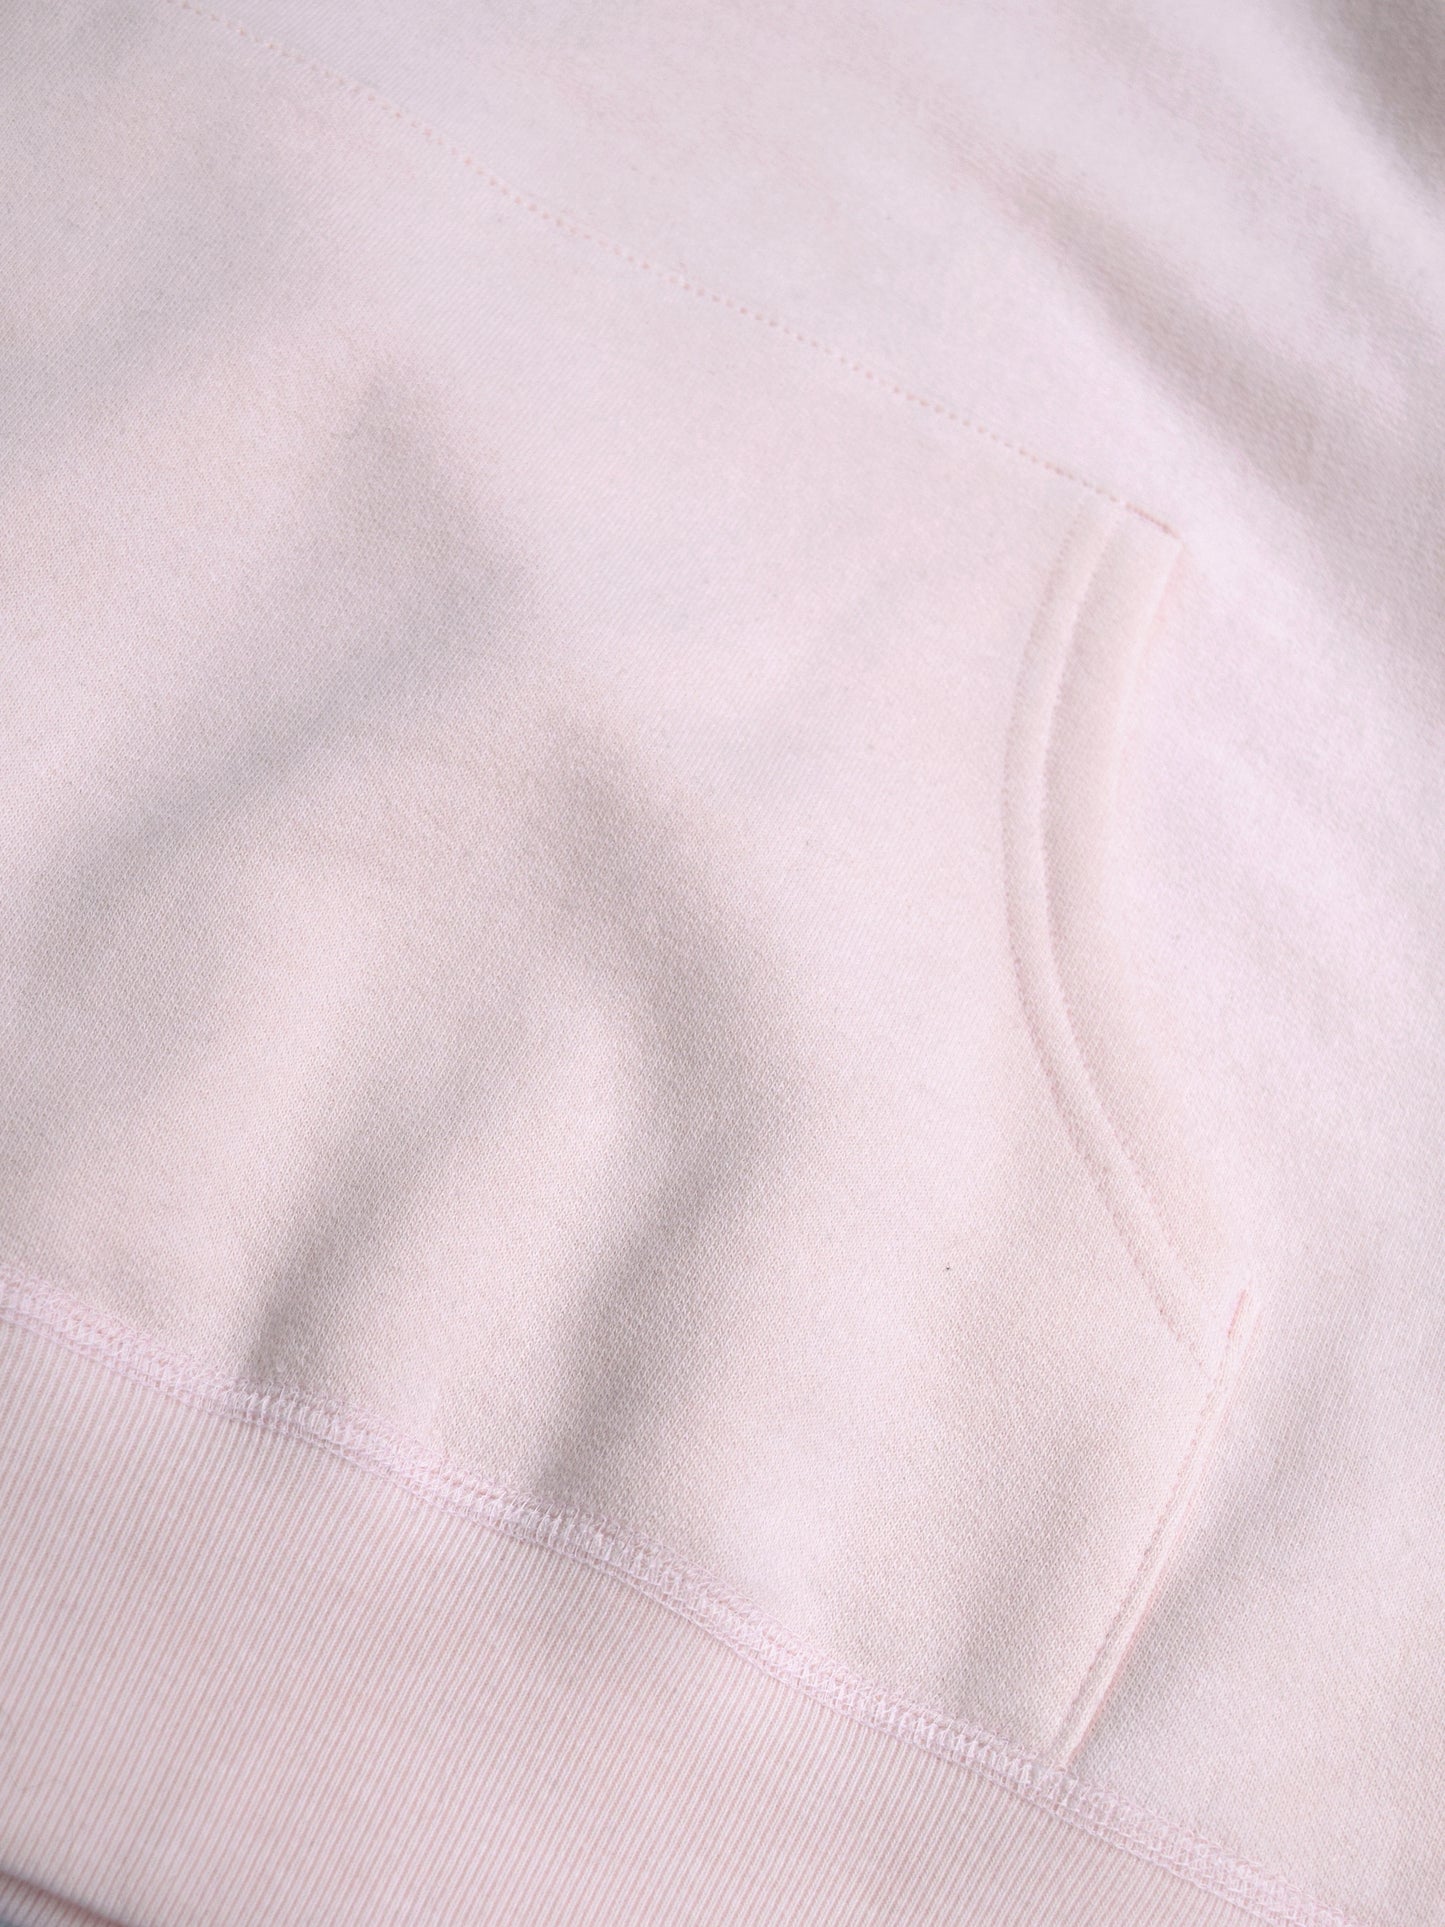 Close up of Kangaroo Pouch, Highlighting Premium Cotton Material